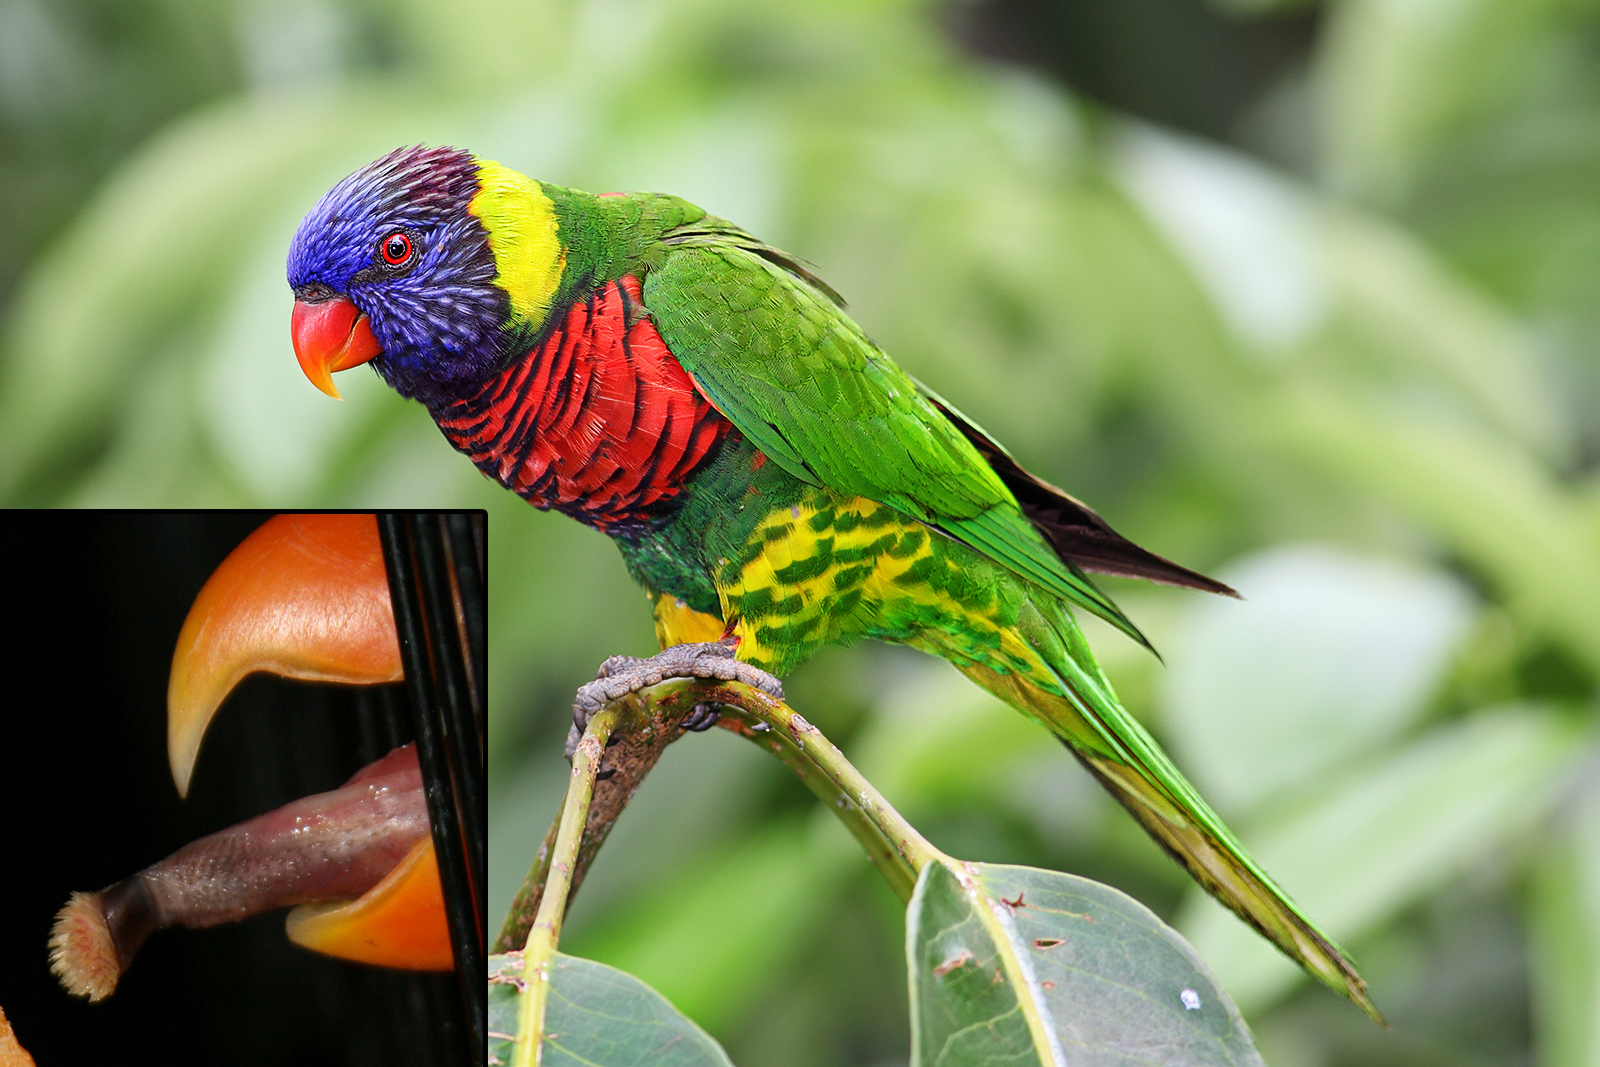 The lorikeet’s tongue is adapted to absorb nectar and pollen from flowers.